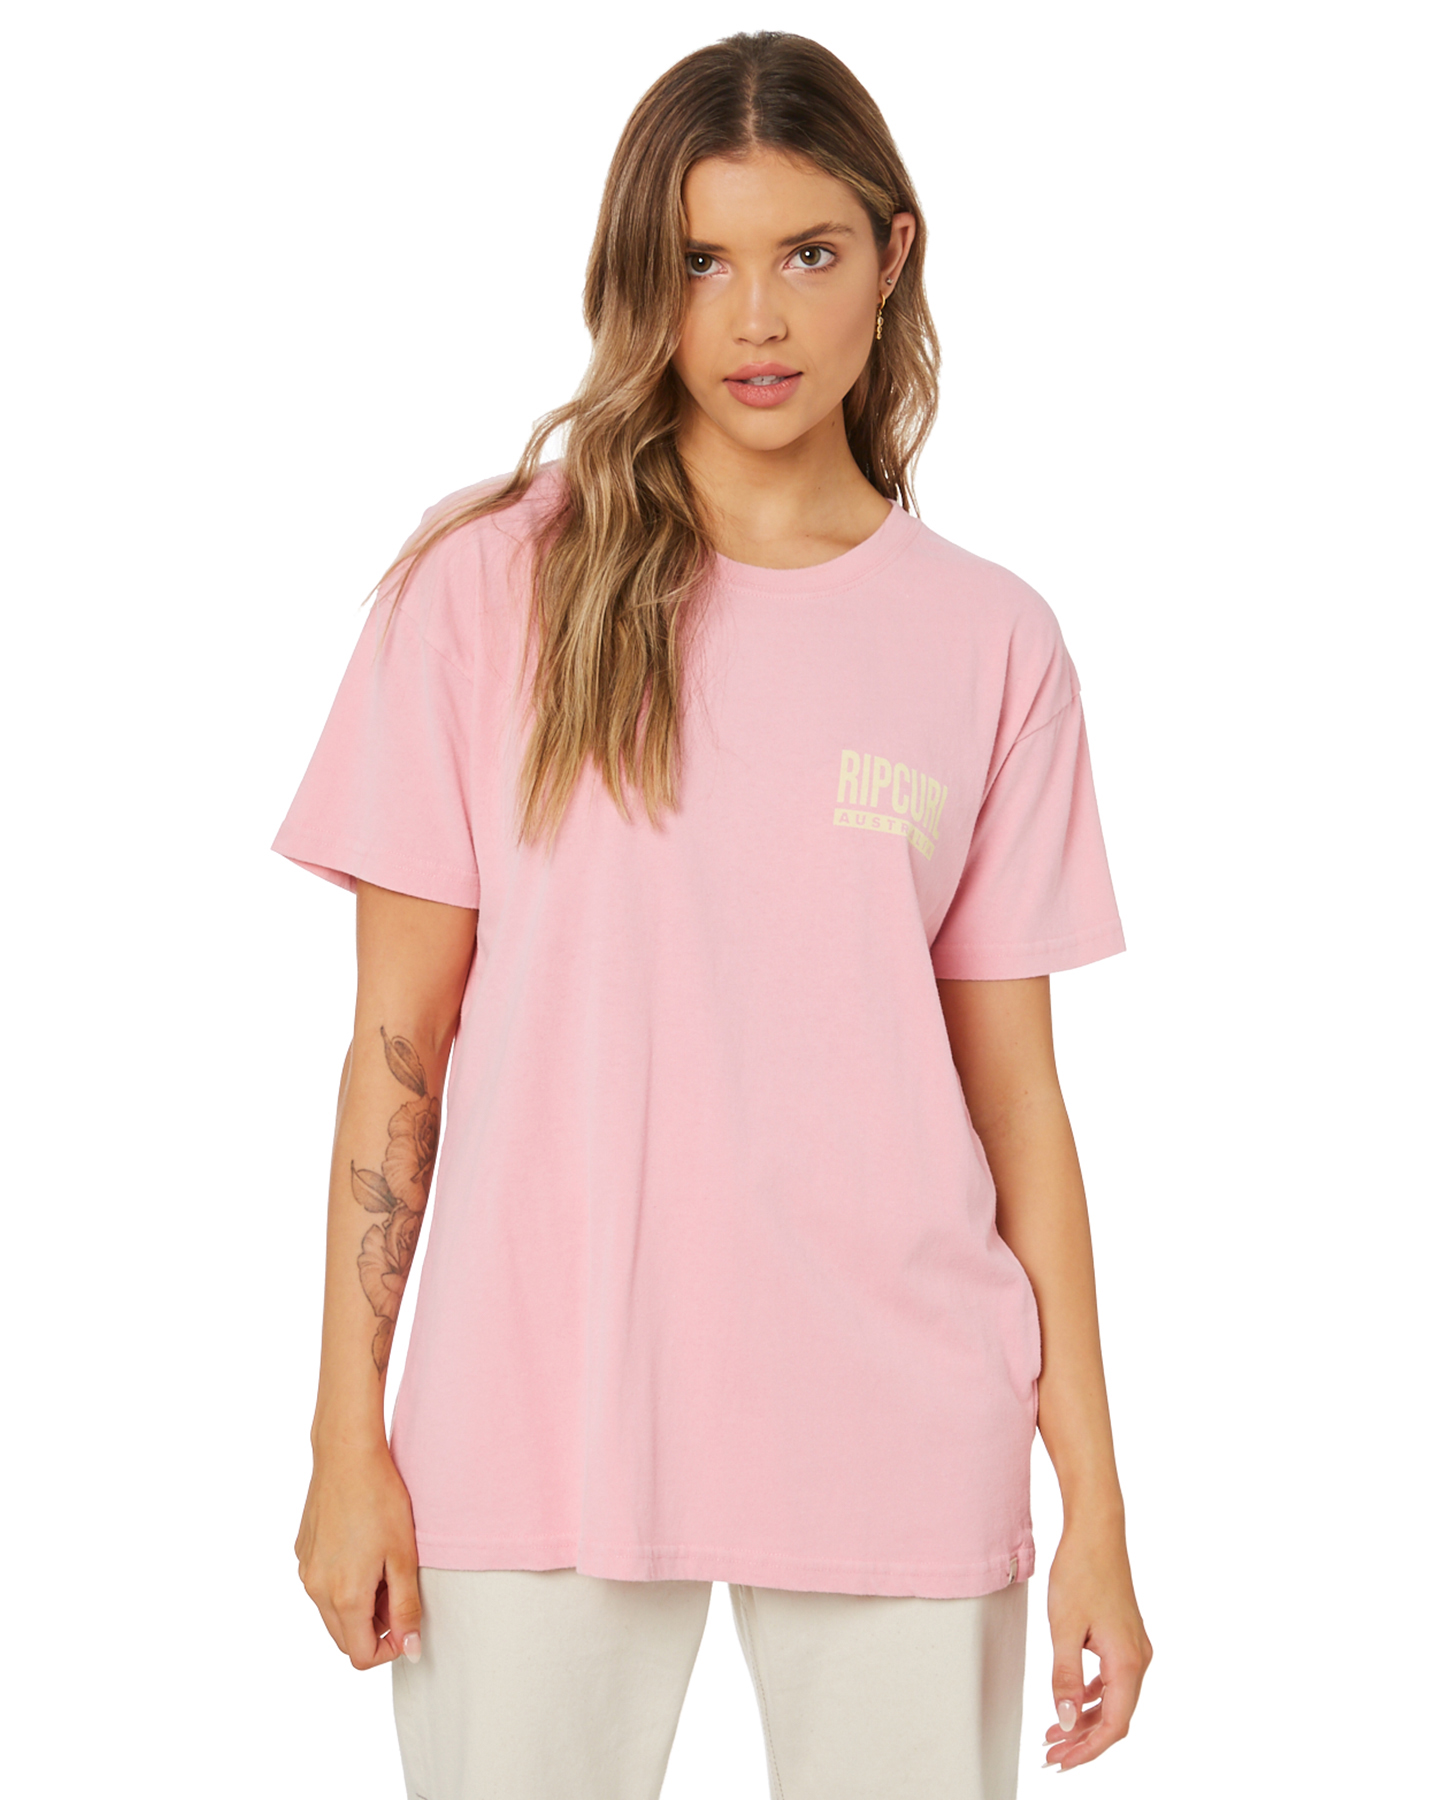 Rip Curl Vintage Revival Oversized Tee - Pink | SurfStitch